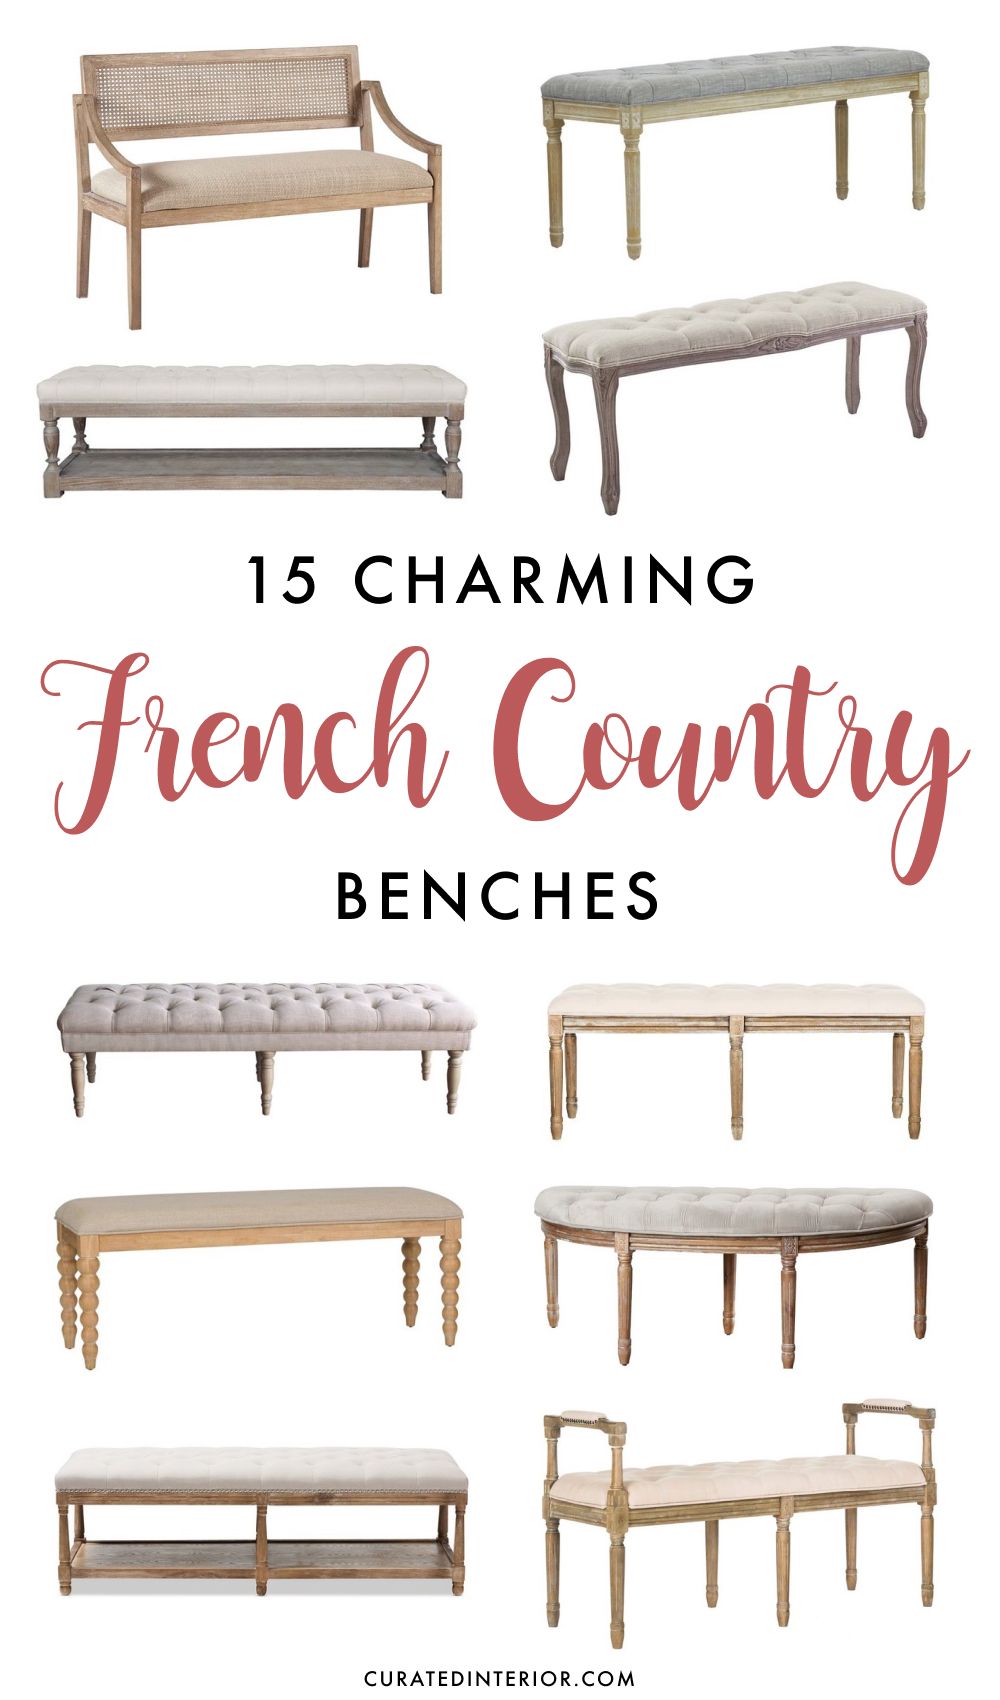 15 Charming French Country Benches for your Bedroom or Entryway